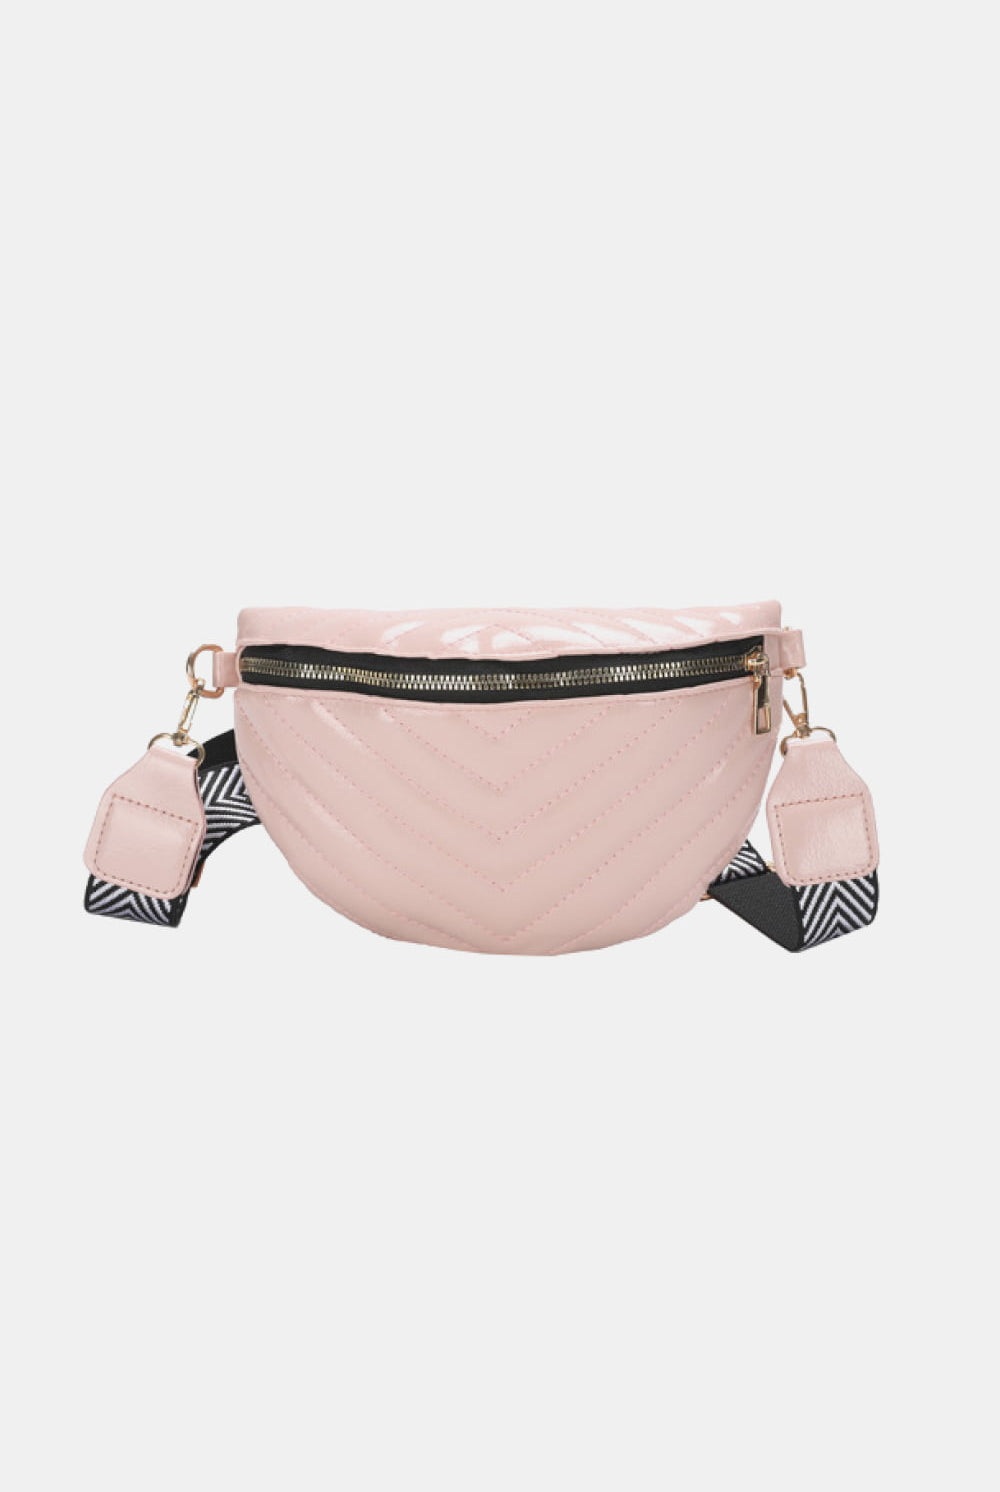 PU Leather Sling Bag - GemThreads Boutique